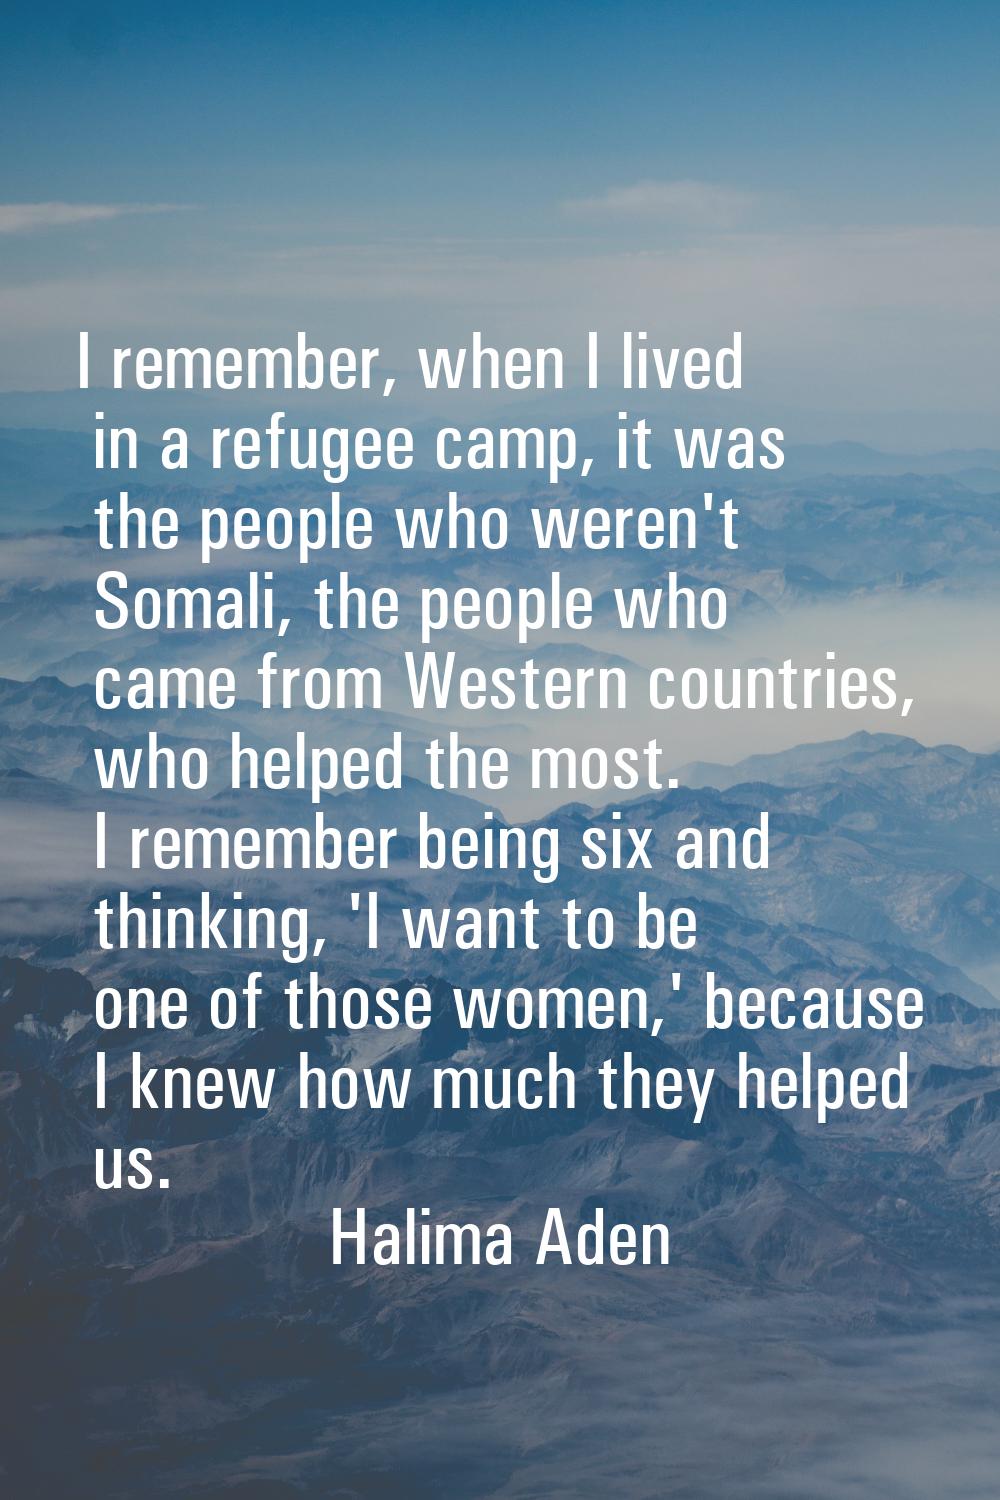 I remember, when I lived in a refugee camp, it was the people who weren't Somali, the people who ca